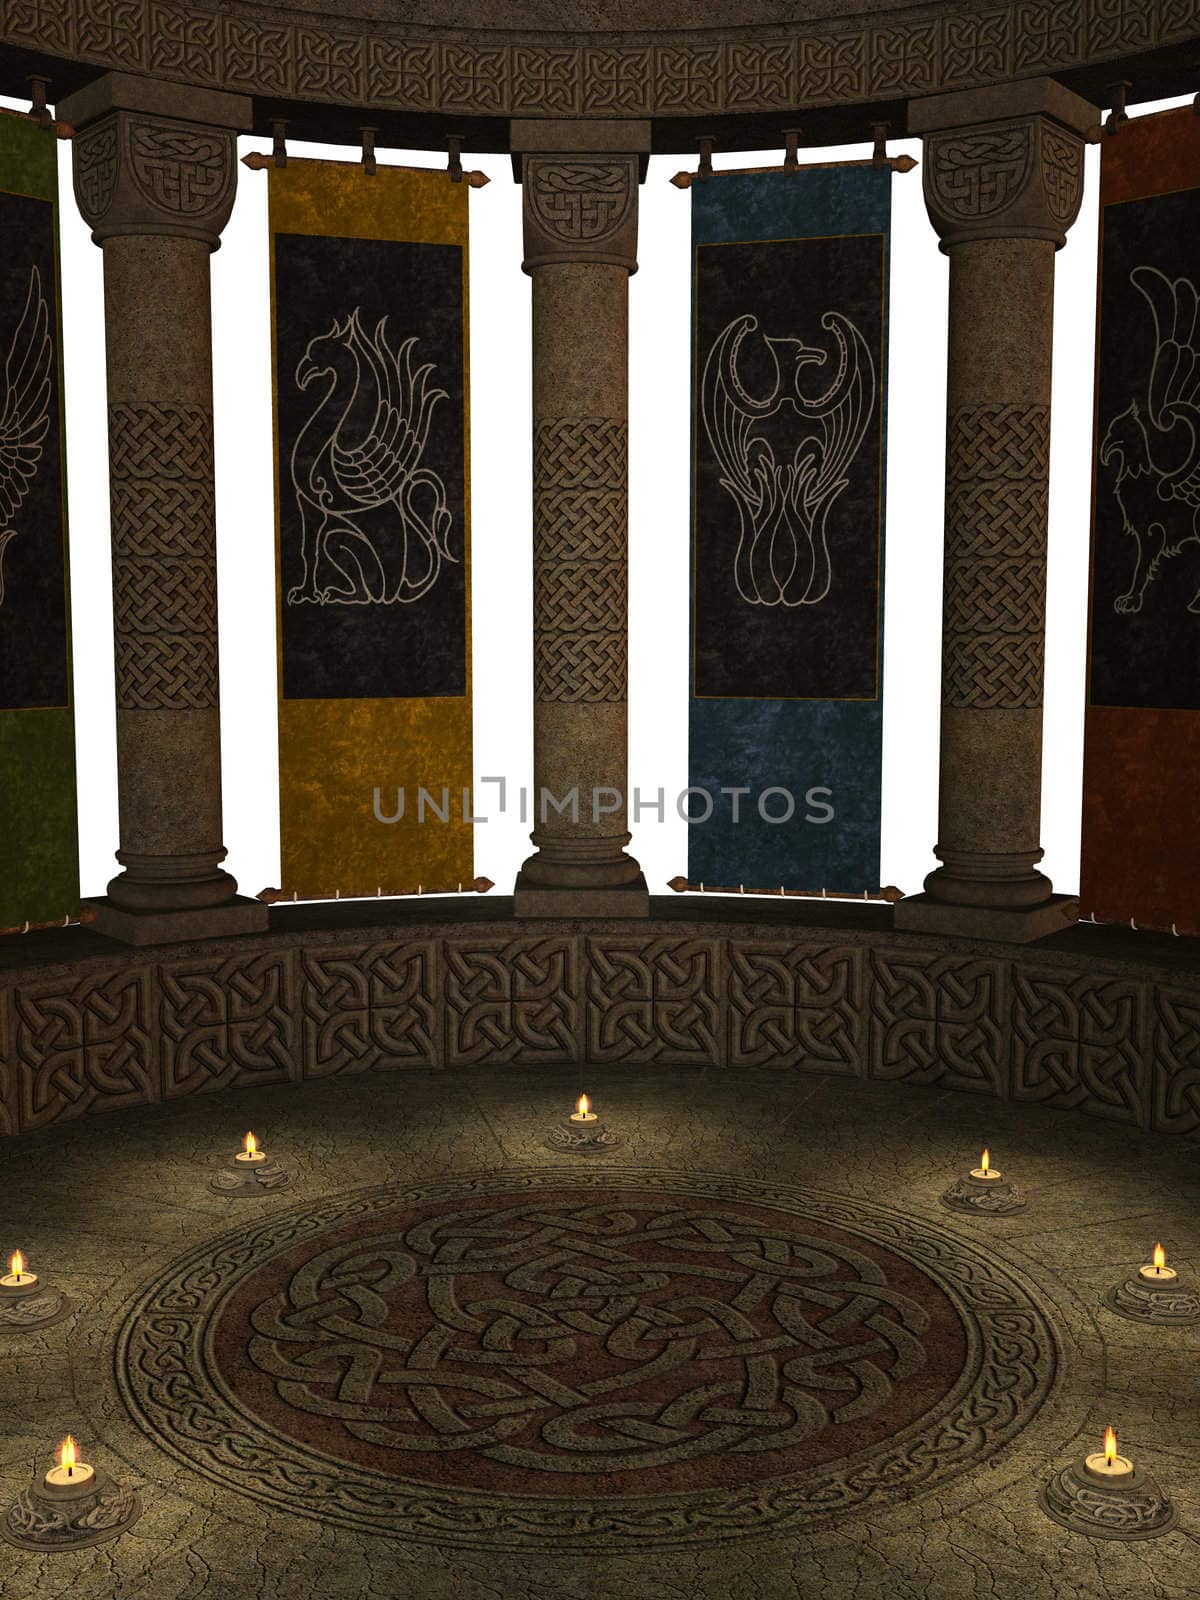 Columns with banners and cancles on a white background